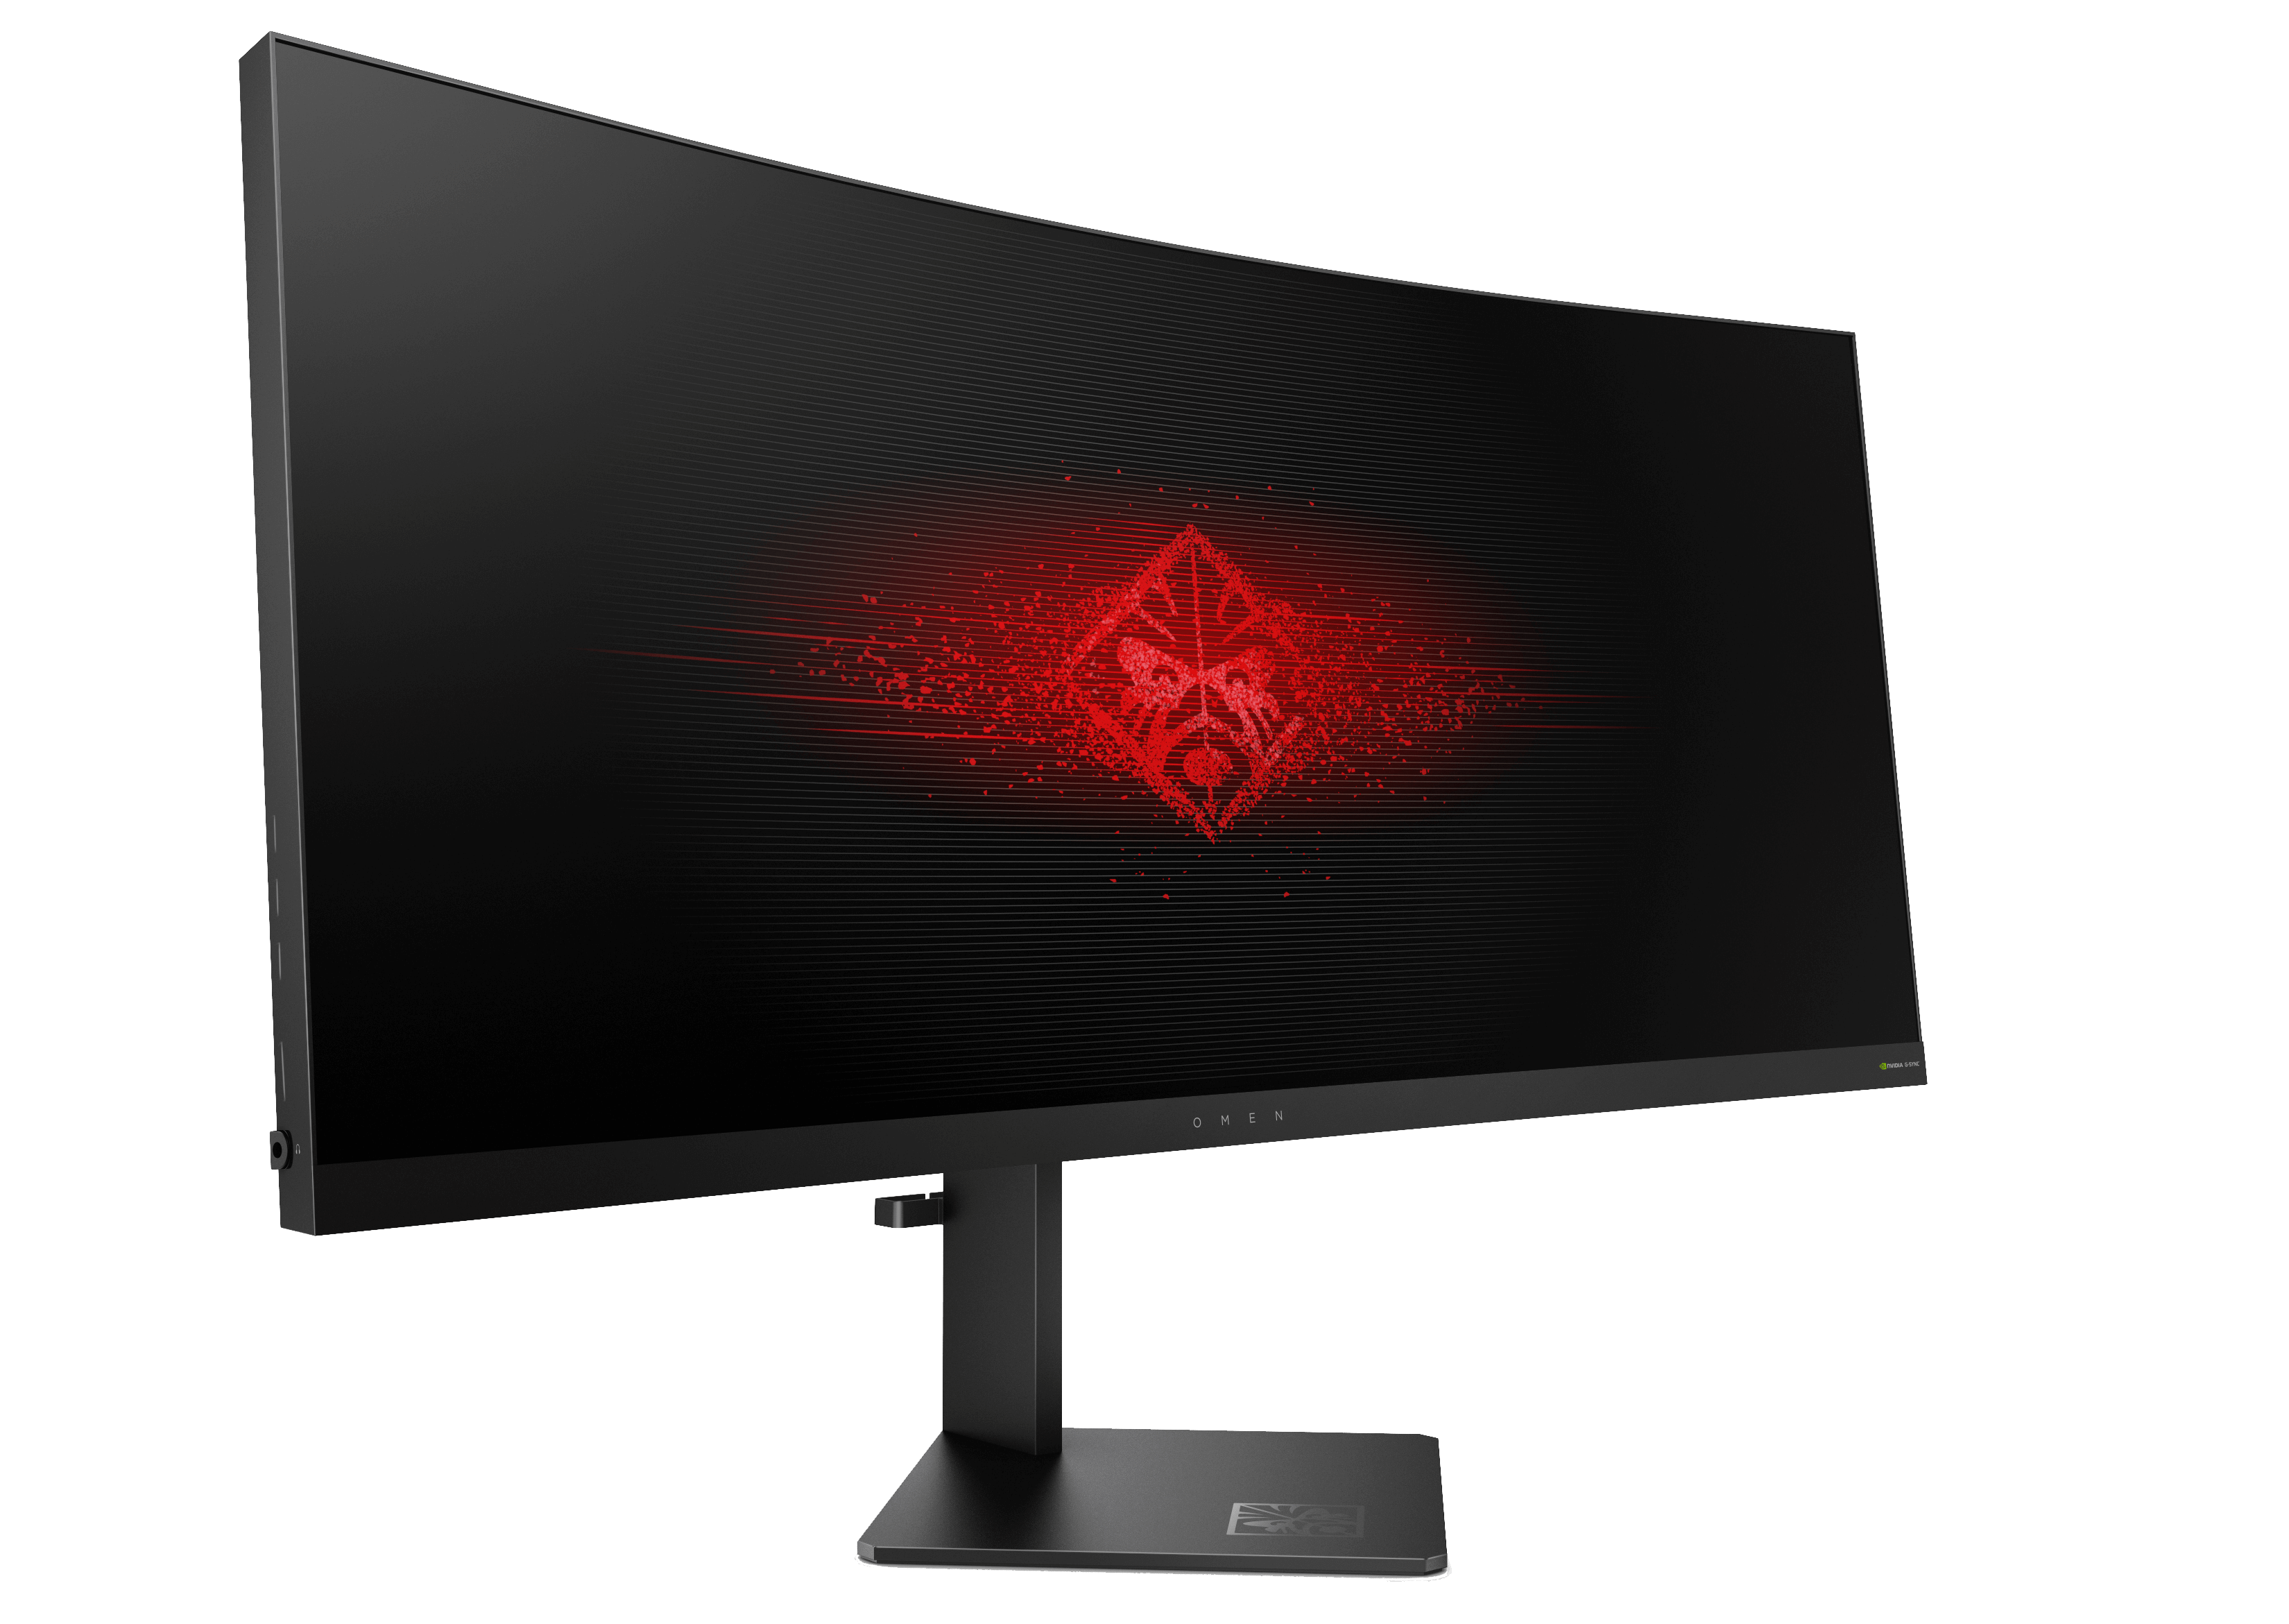 Nvidia announces G-Sync HDR for flagship gaming displays